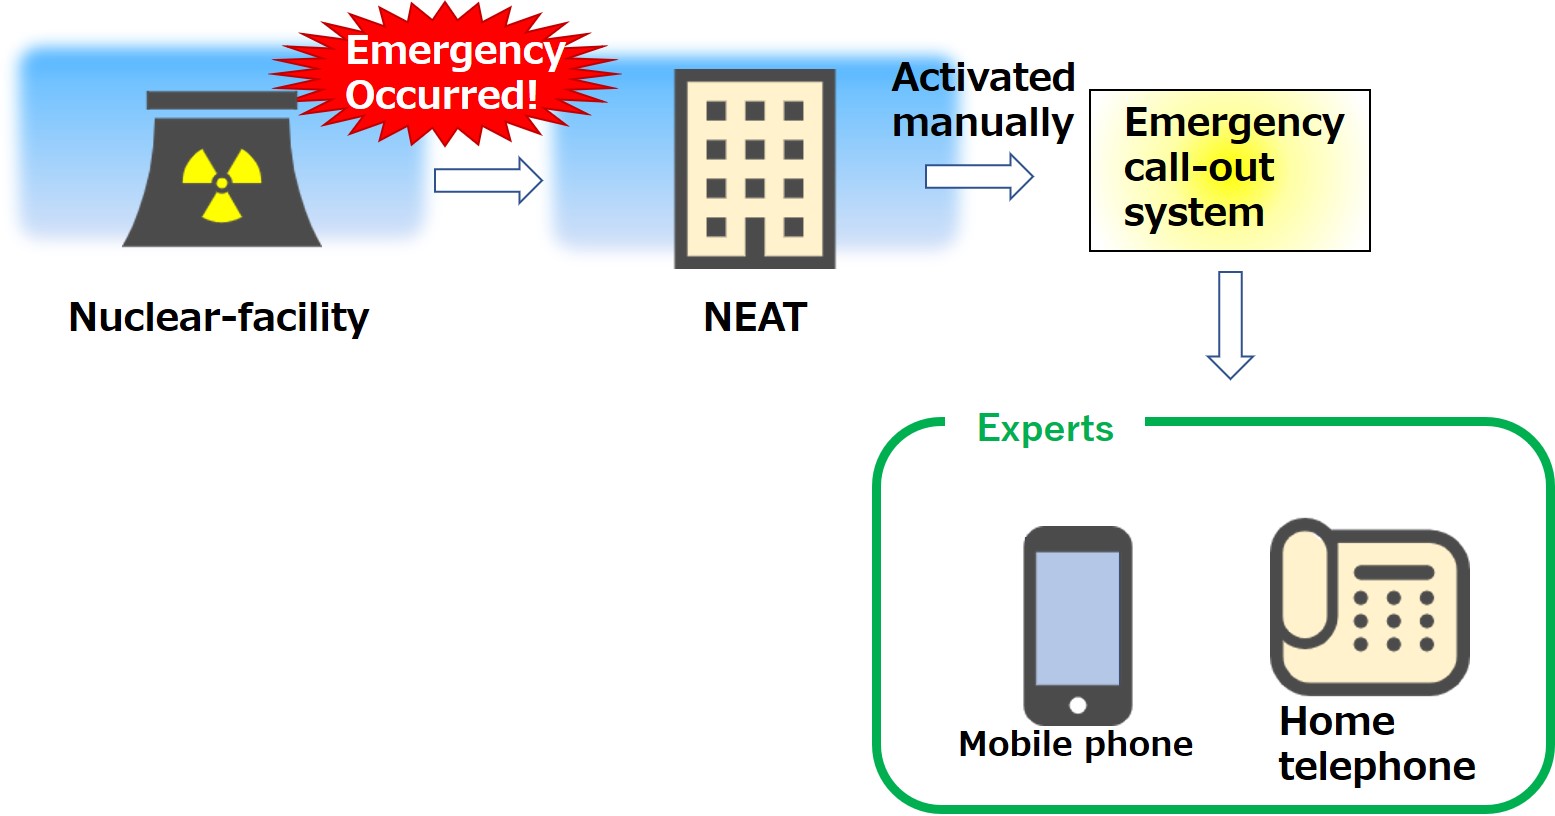 Emergency call-out system